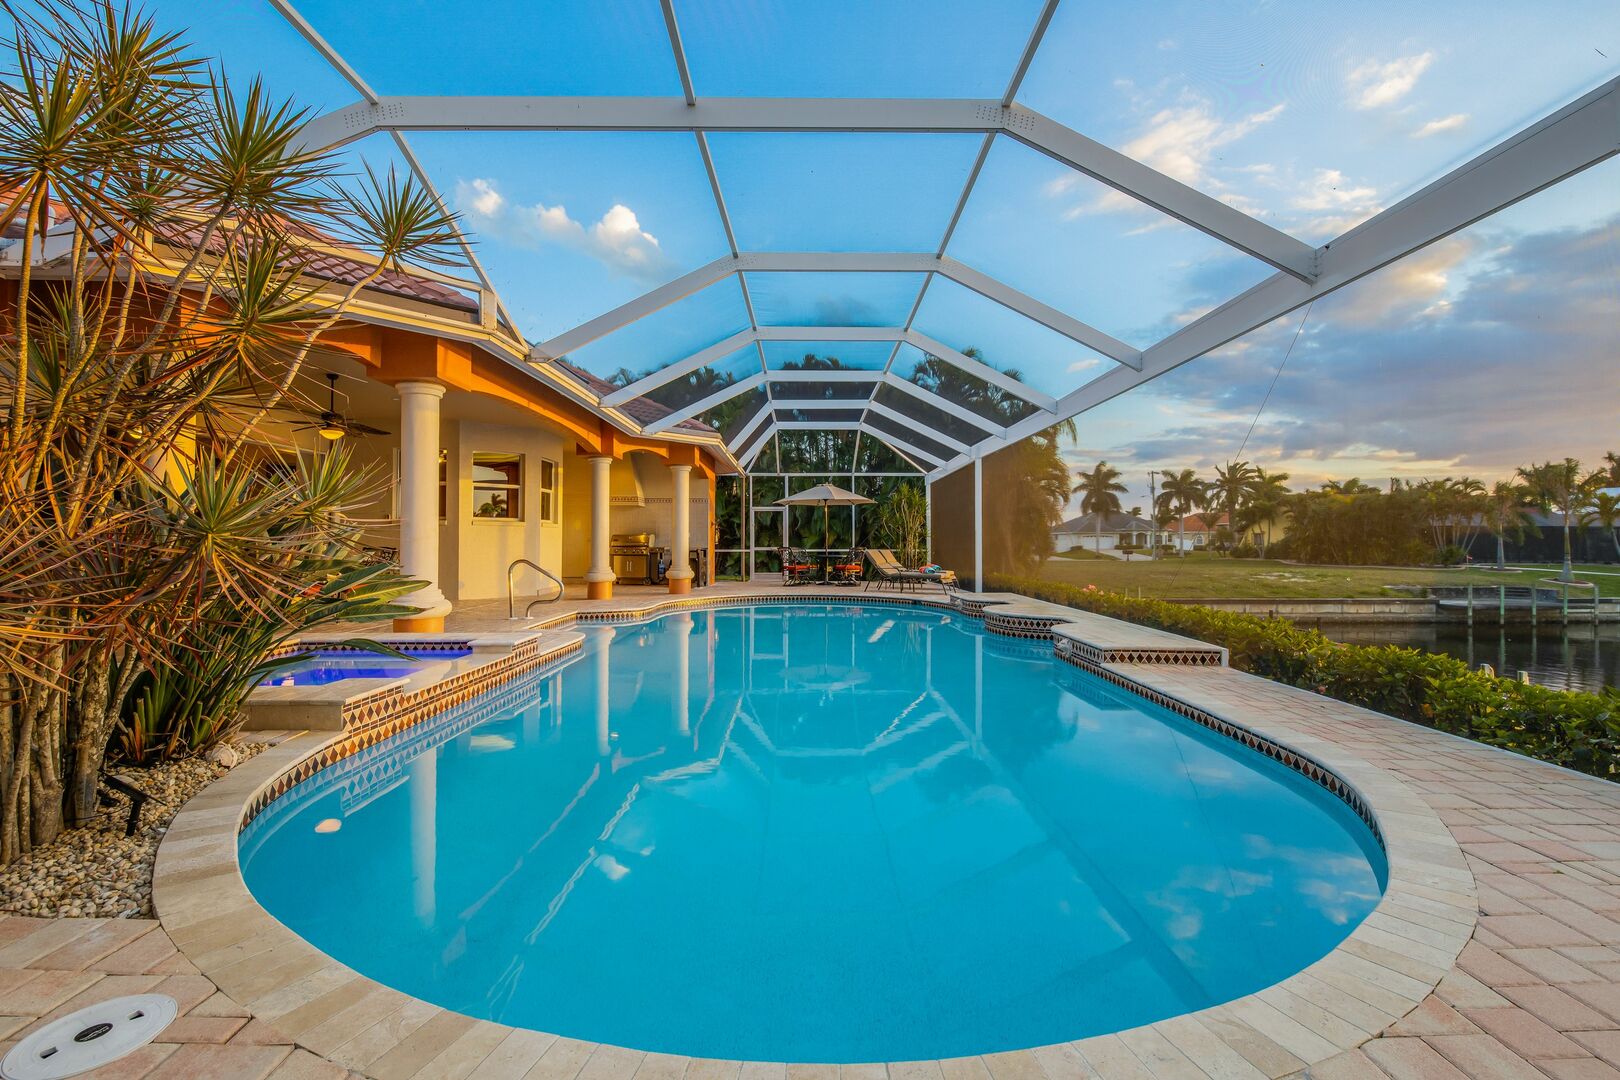 Heated pool vacation rental in Cape Coral